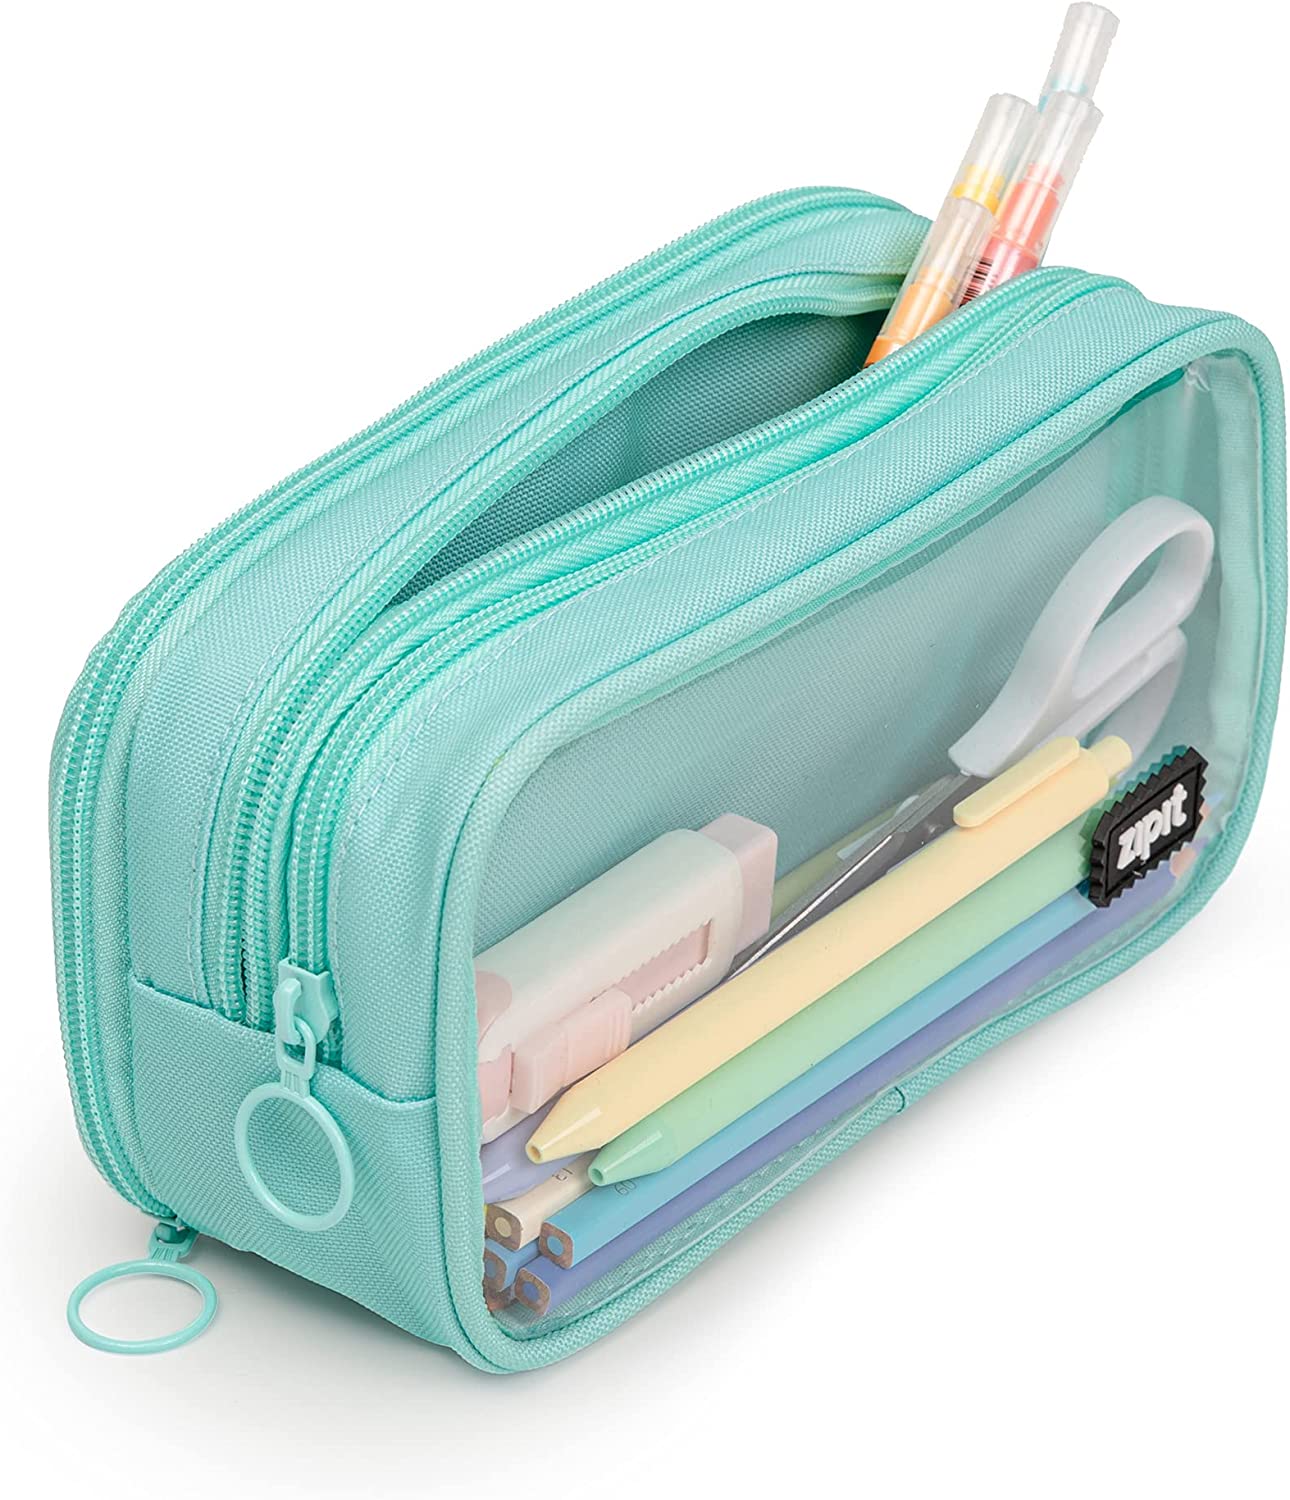 Zipper Pencil Case Large Capacity Pouch Multi-Compartments Free Shipping